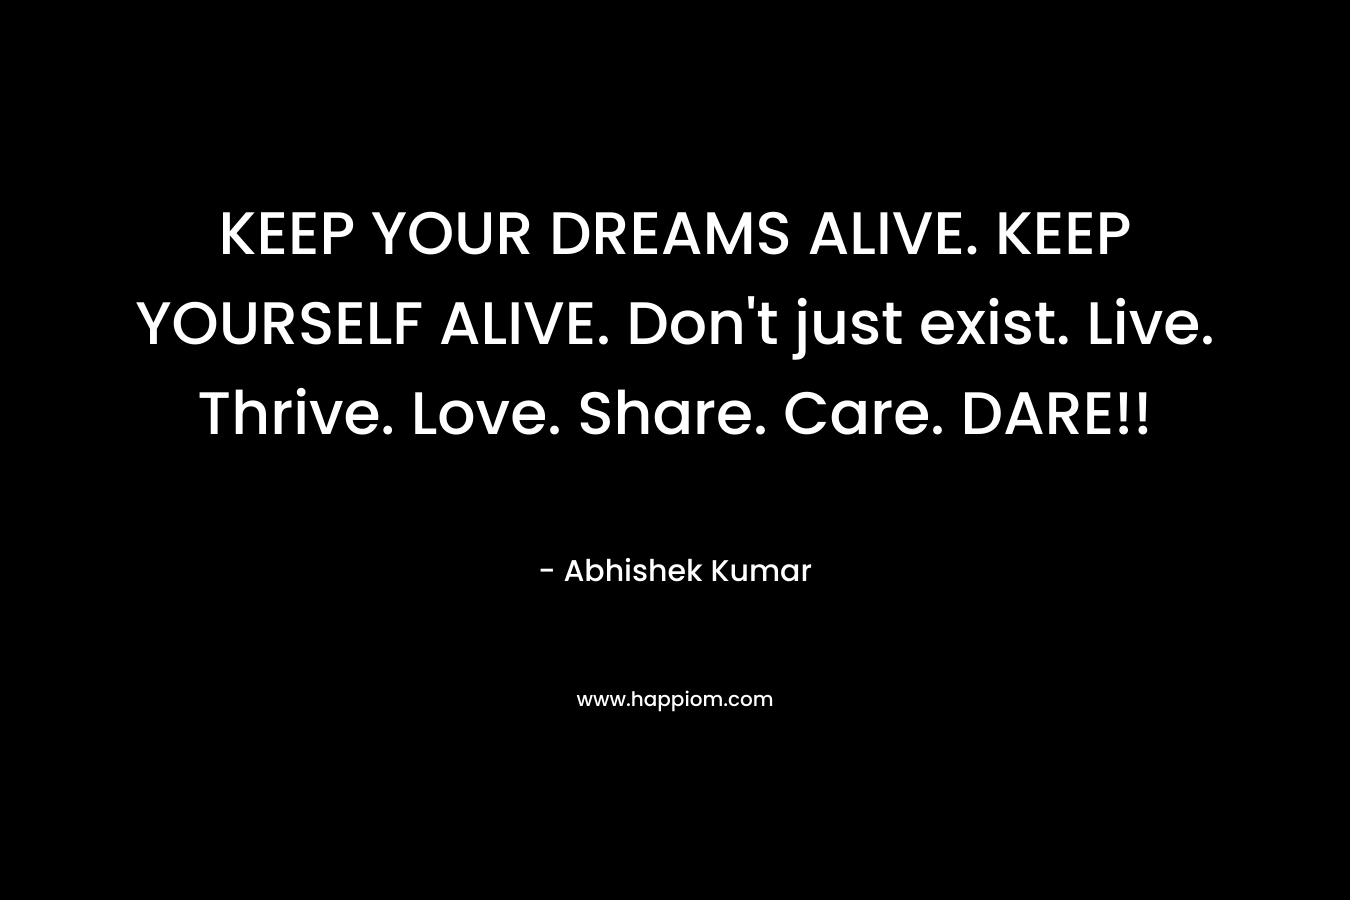 KEEP YOUR DREAMS ALIVE. KEEP YOURSELF ALIVE. Don't just exist. Live. Thrive. Love. Share. Care. DARE!!